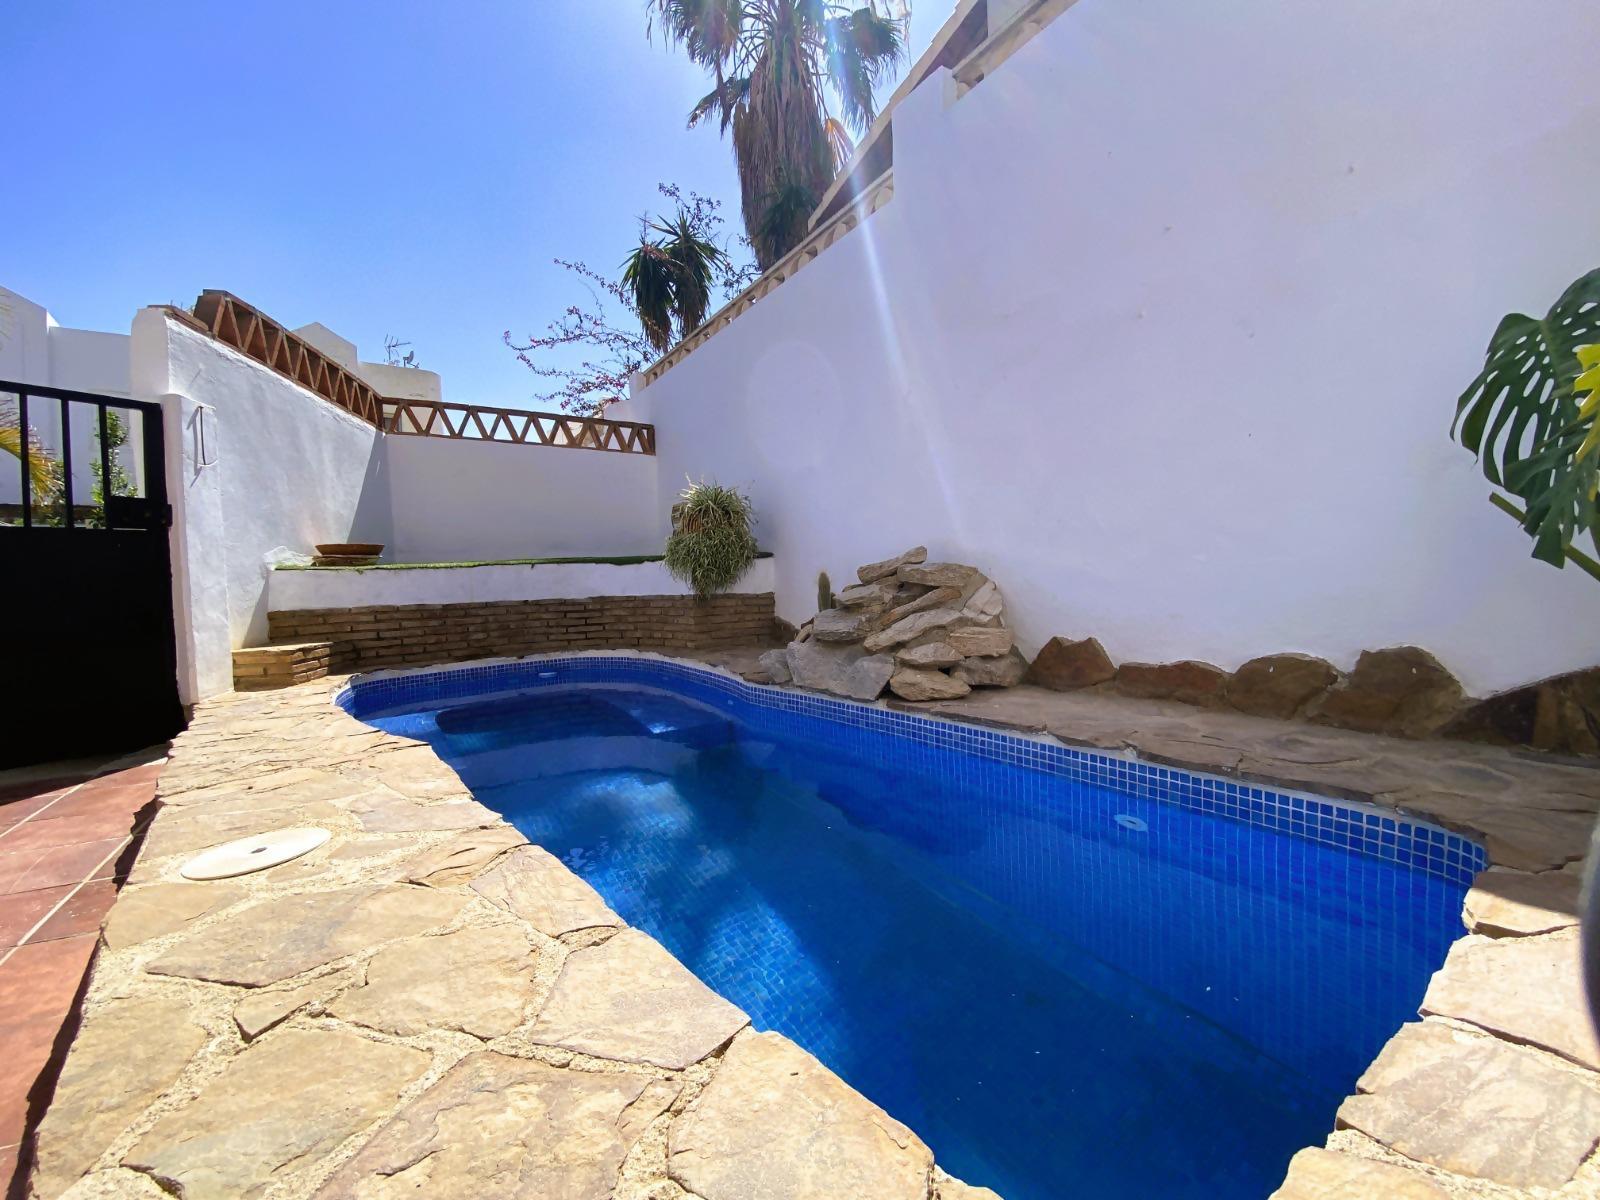 Modern and elegant 3 bedroom townhouse: Apartment for Rent in Mojácar, Almería